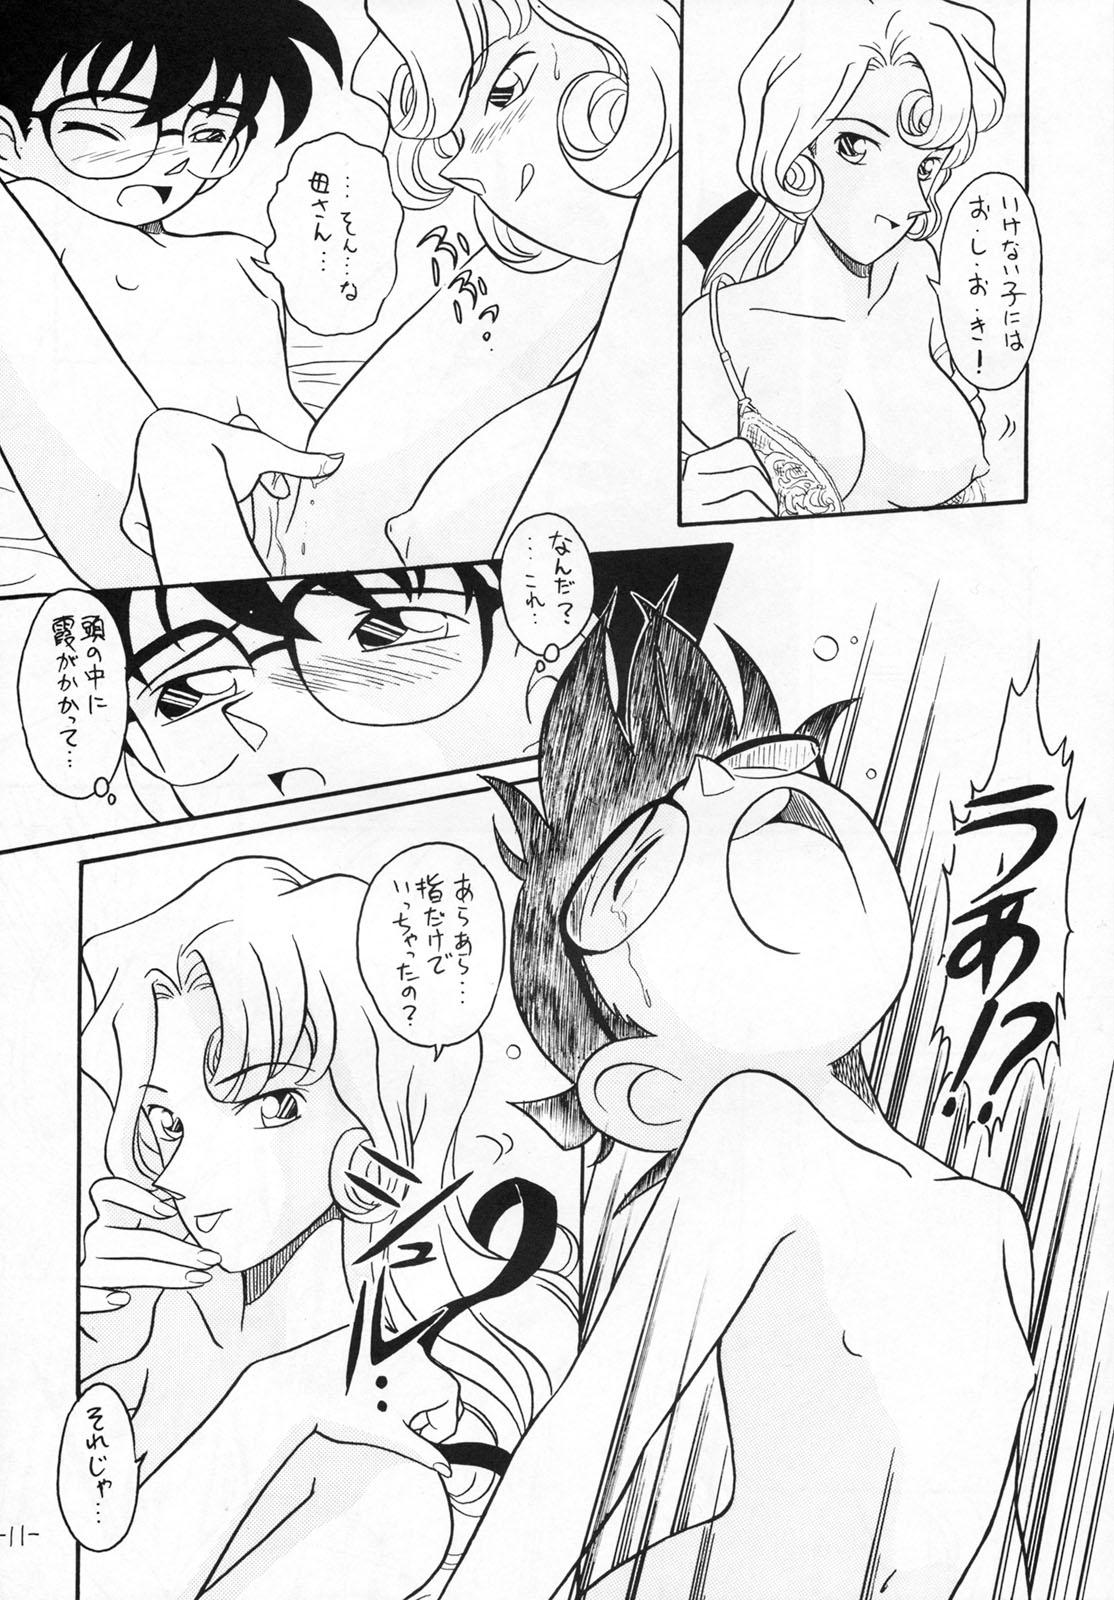 Spanking OUT SIDE 9 - Detective conan Gaping - Page 10